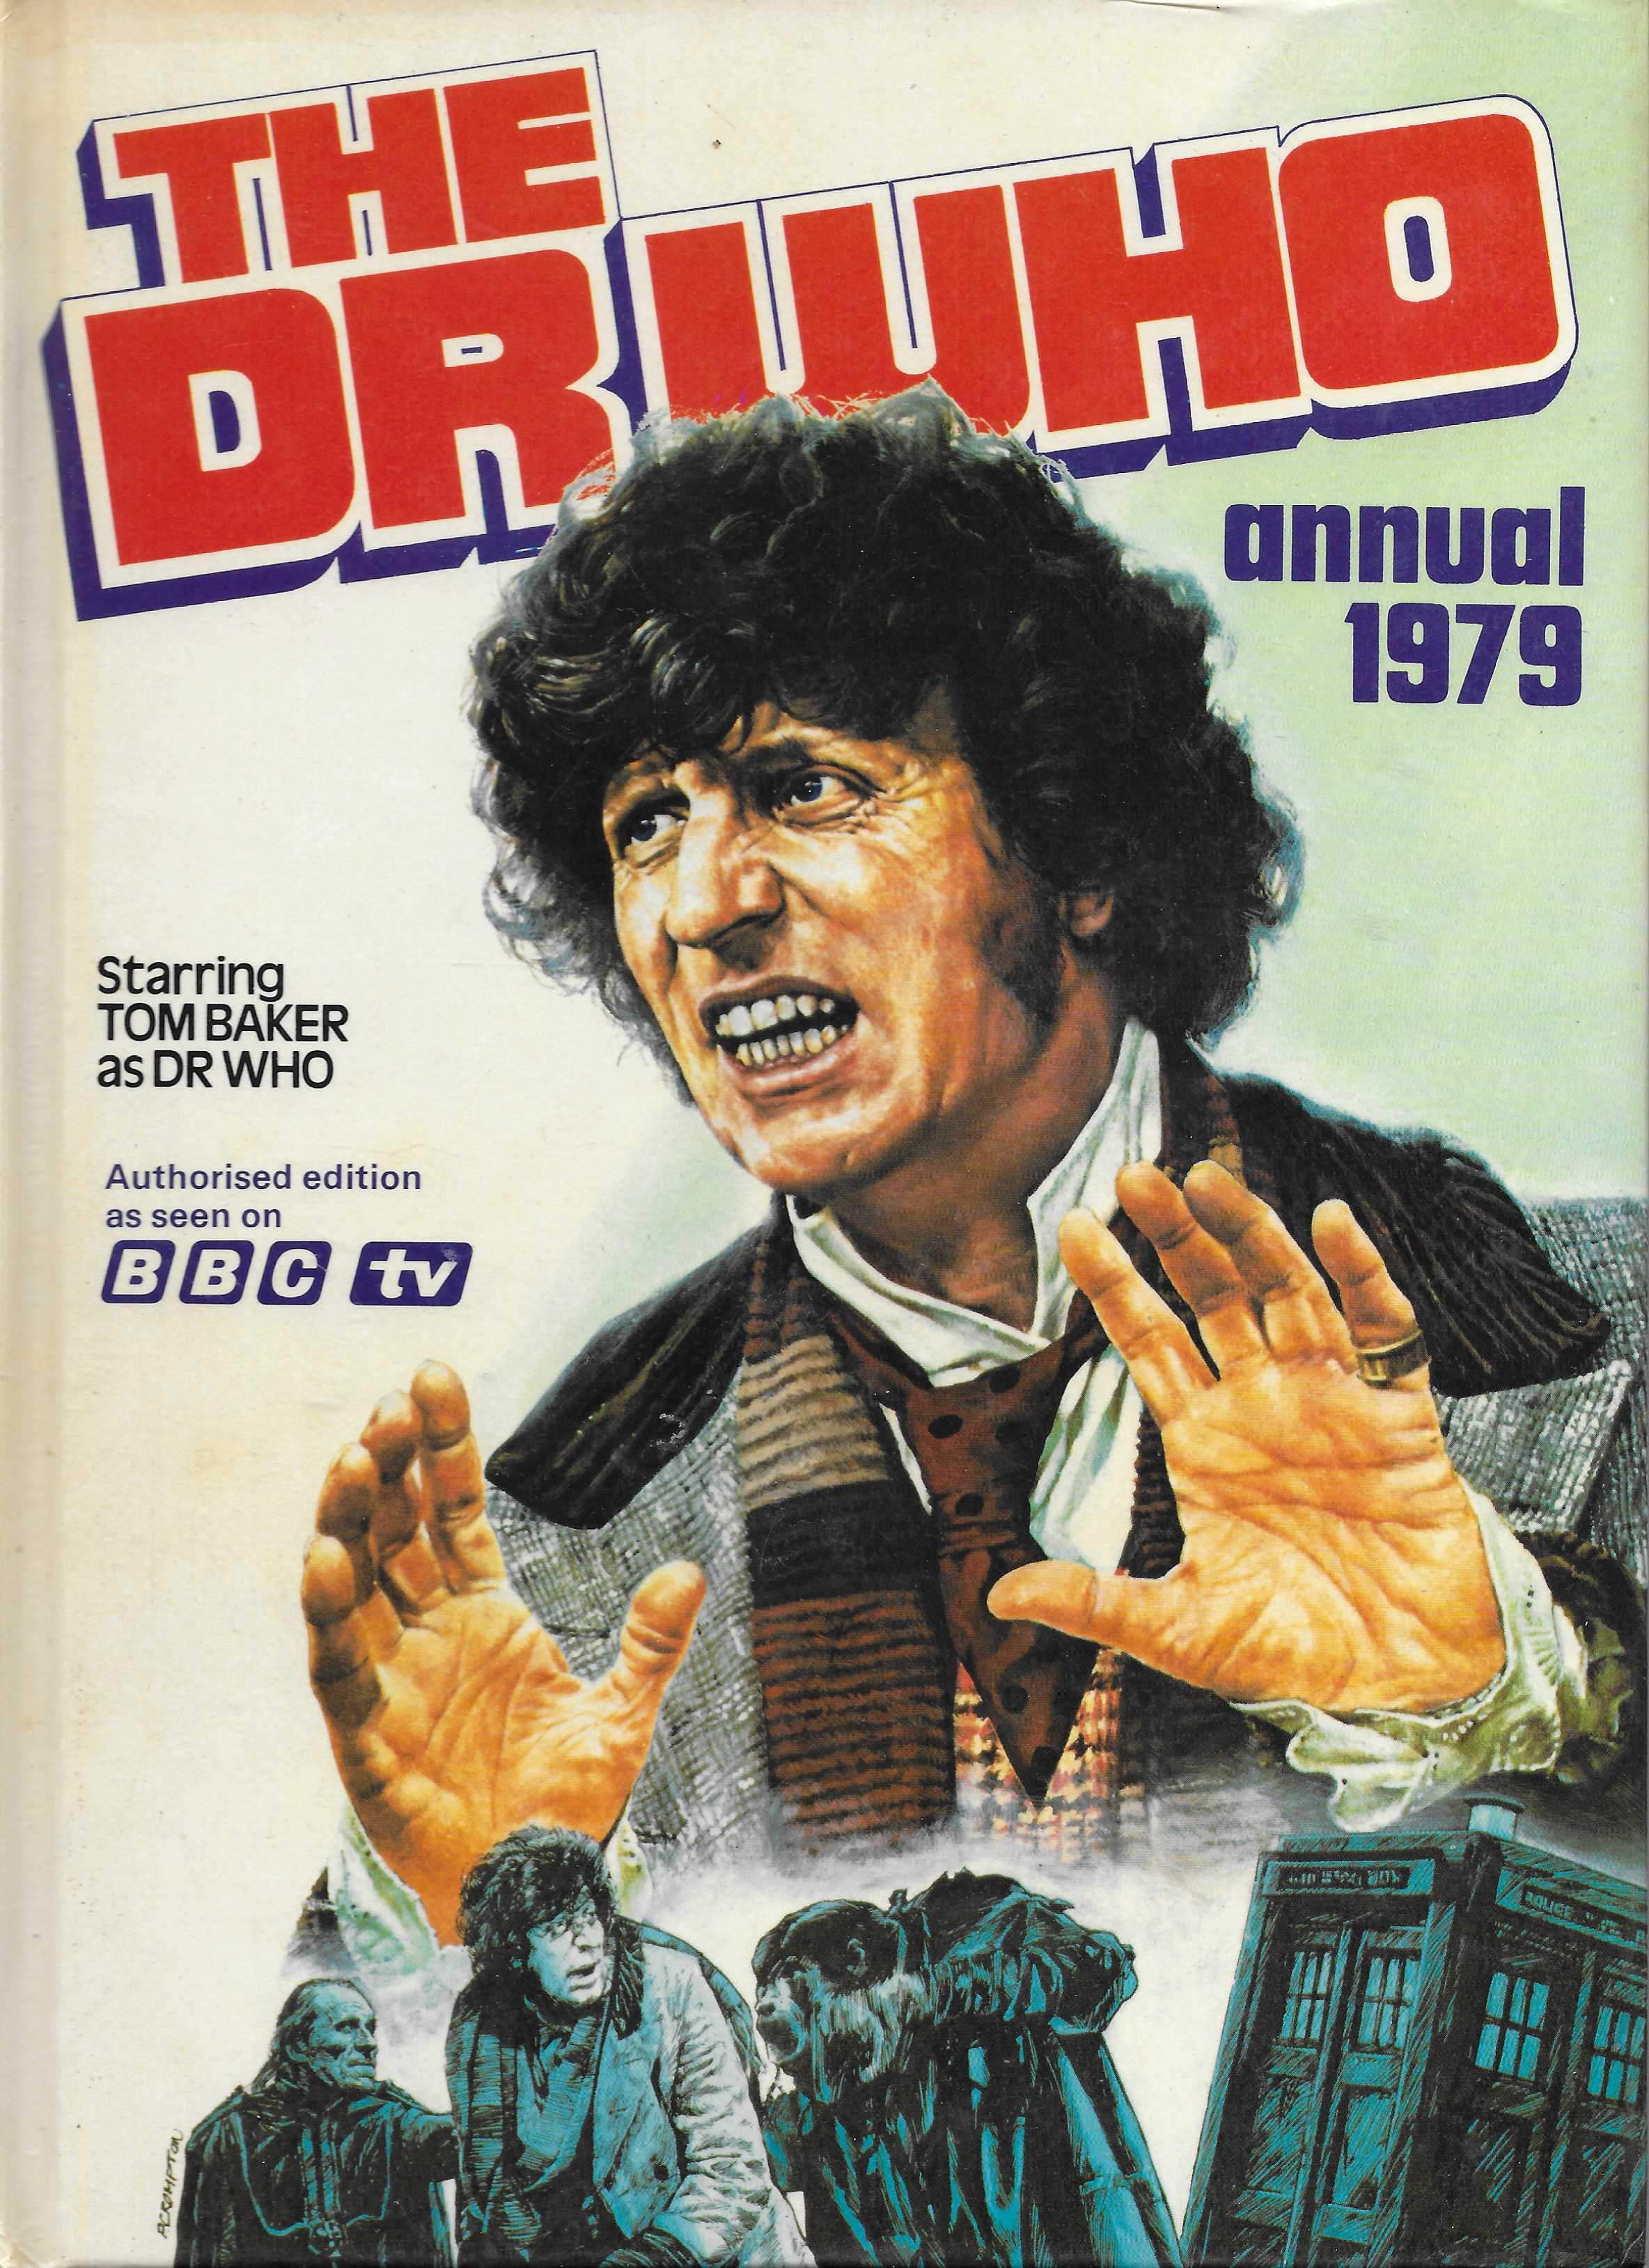 Picture of SBN 7235 0491 1 The Dr Who annual 1979 by artist Various from the BBC records and Tapes library